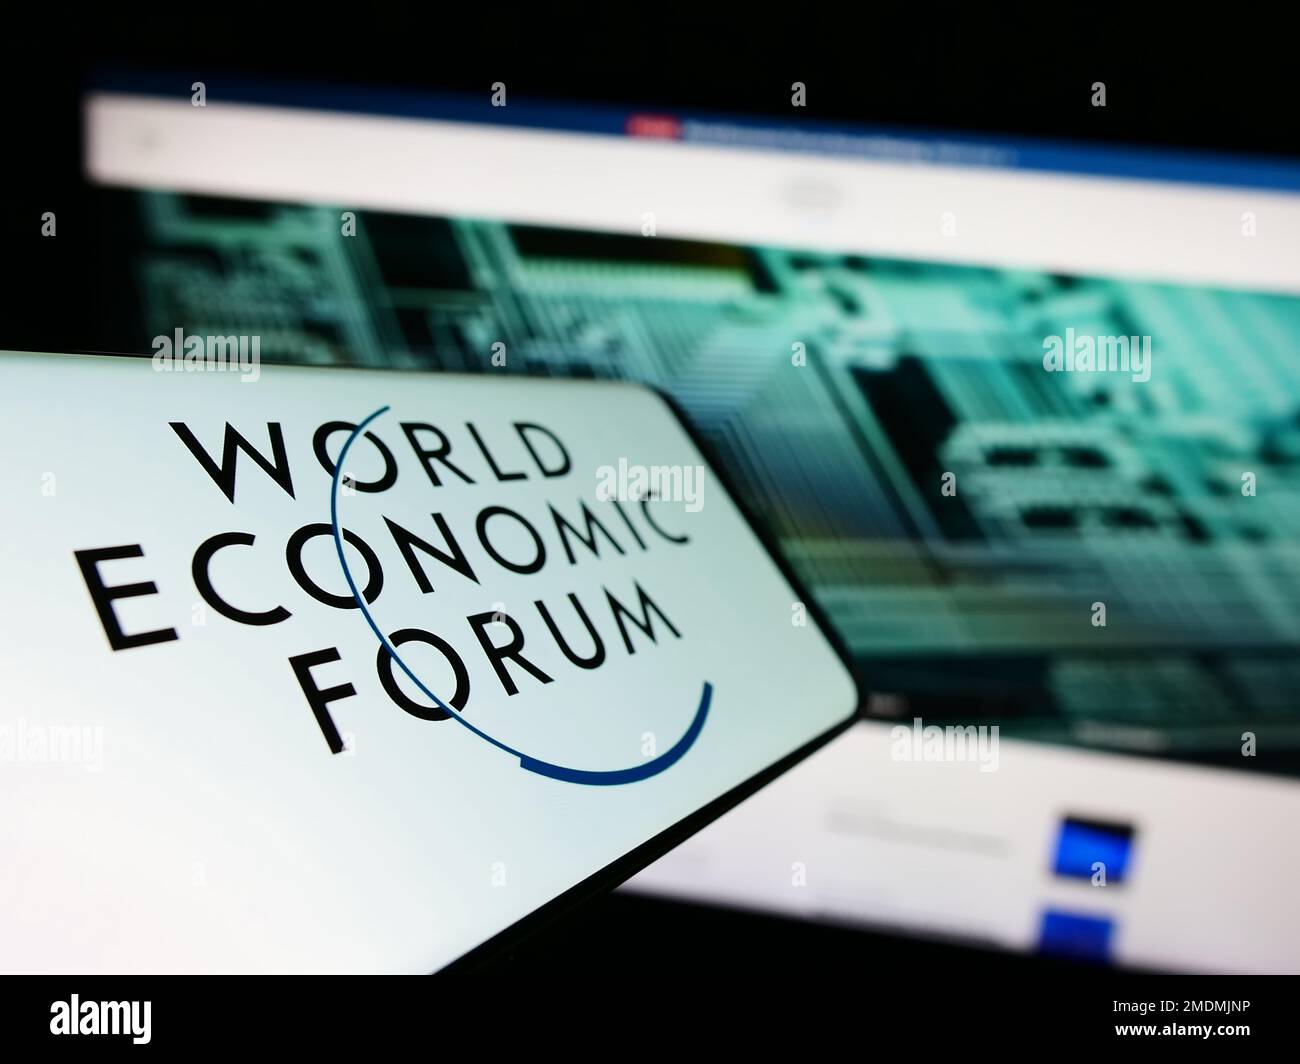 Smartphone with logo of organisation World Economic Forum (WEF) on screen in front of website. Focus on center-left of phone display. Stock Photo